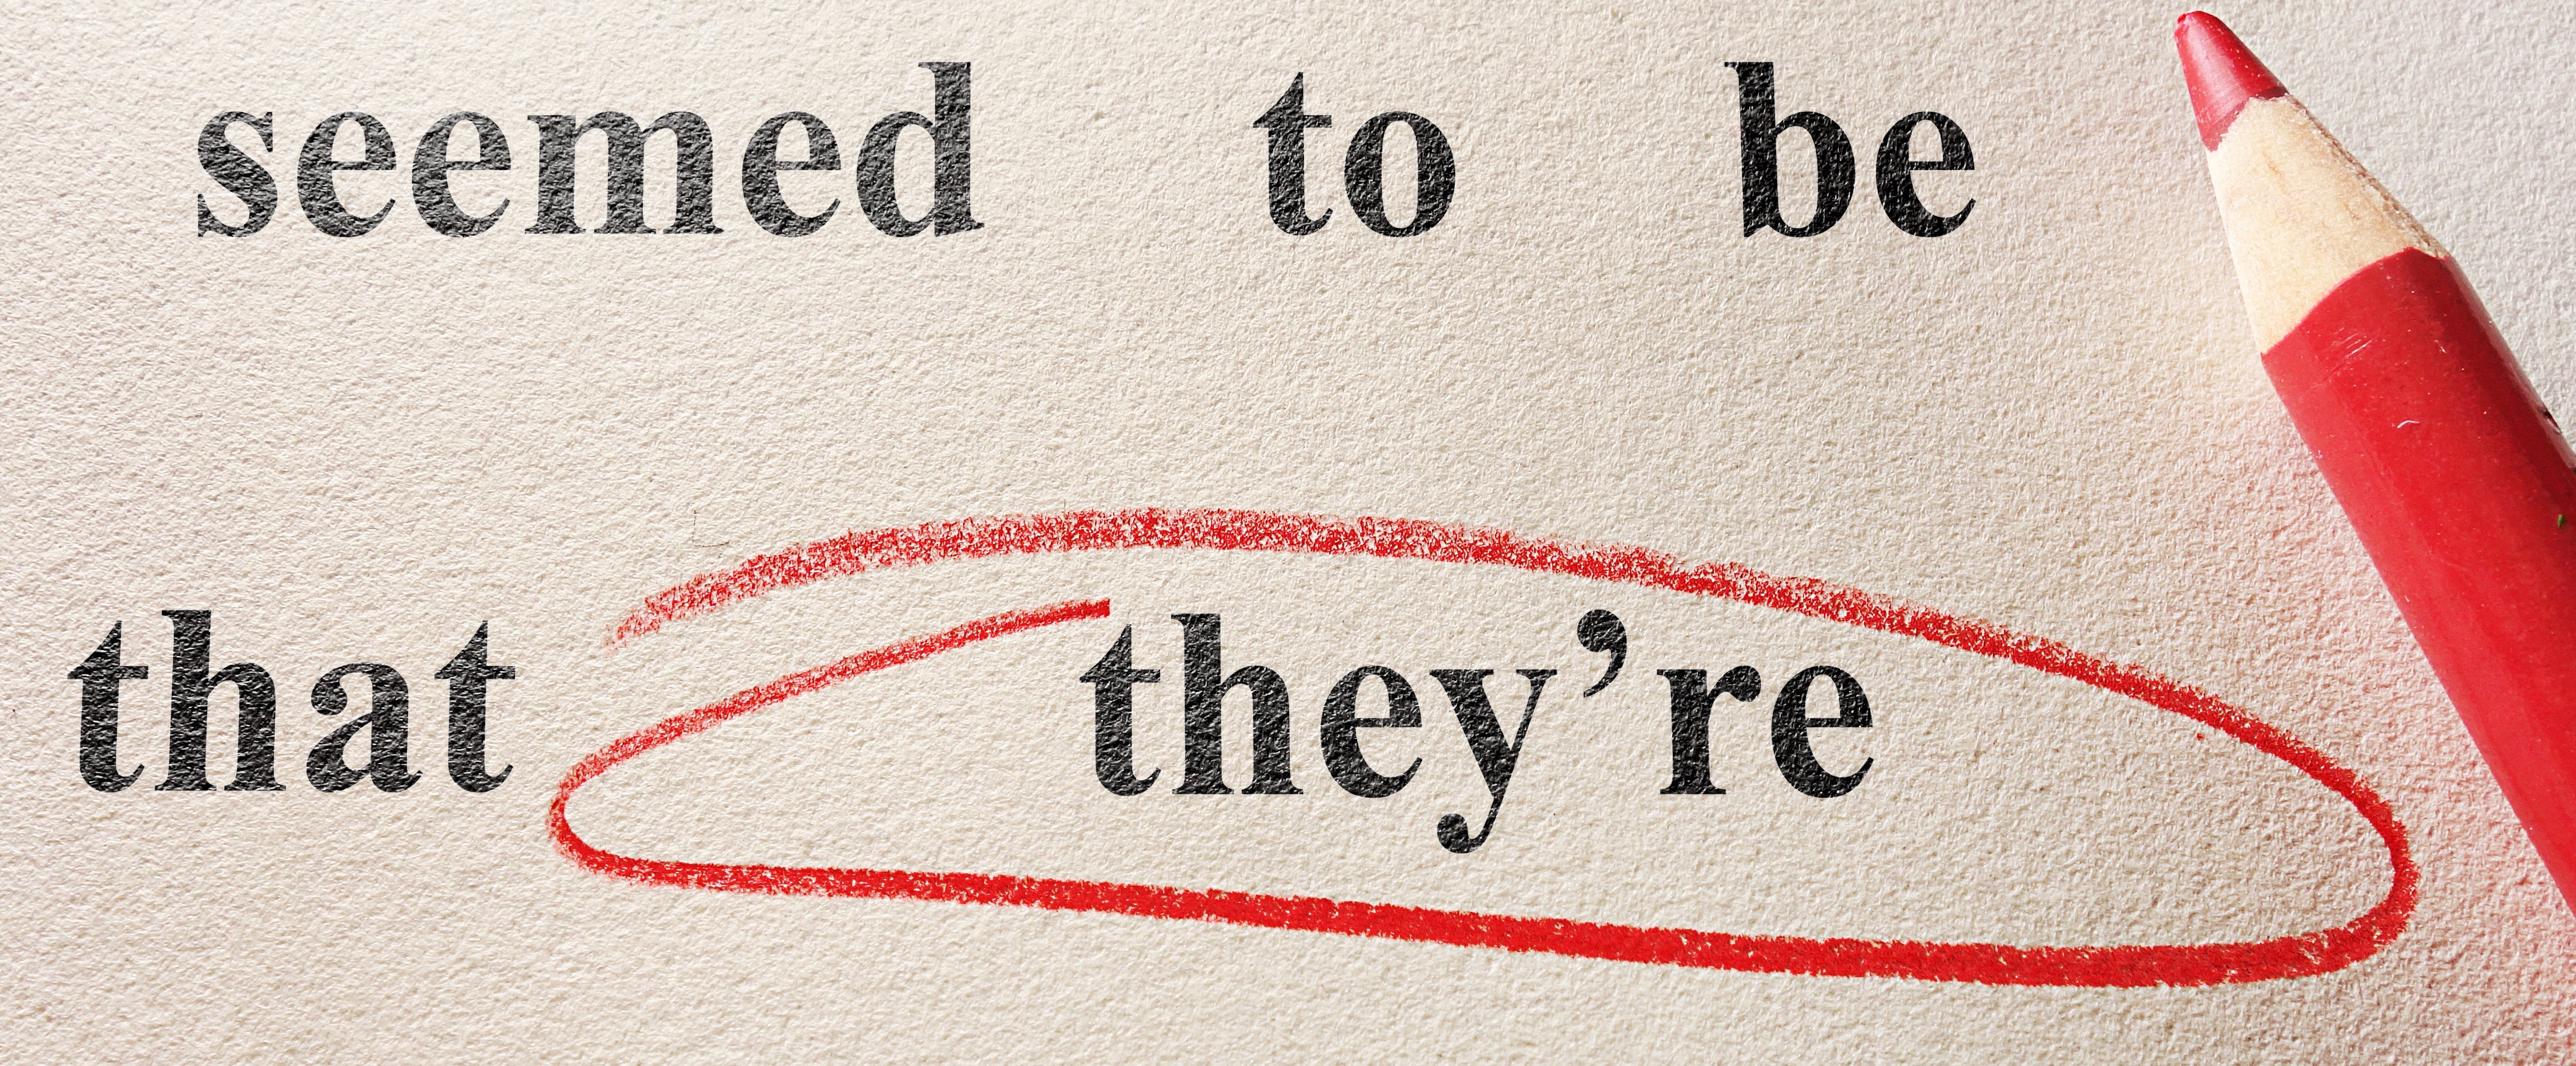 Grammar Police: 30 of the Most Common Grammatical Errors We All Need to Stop Making